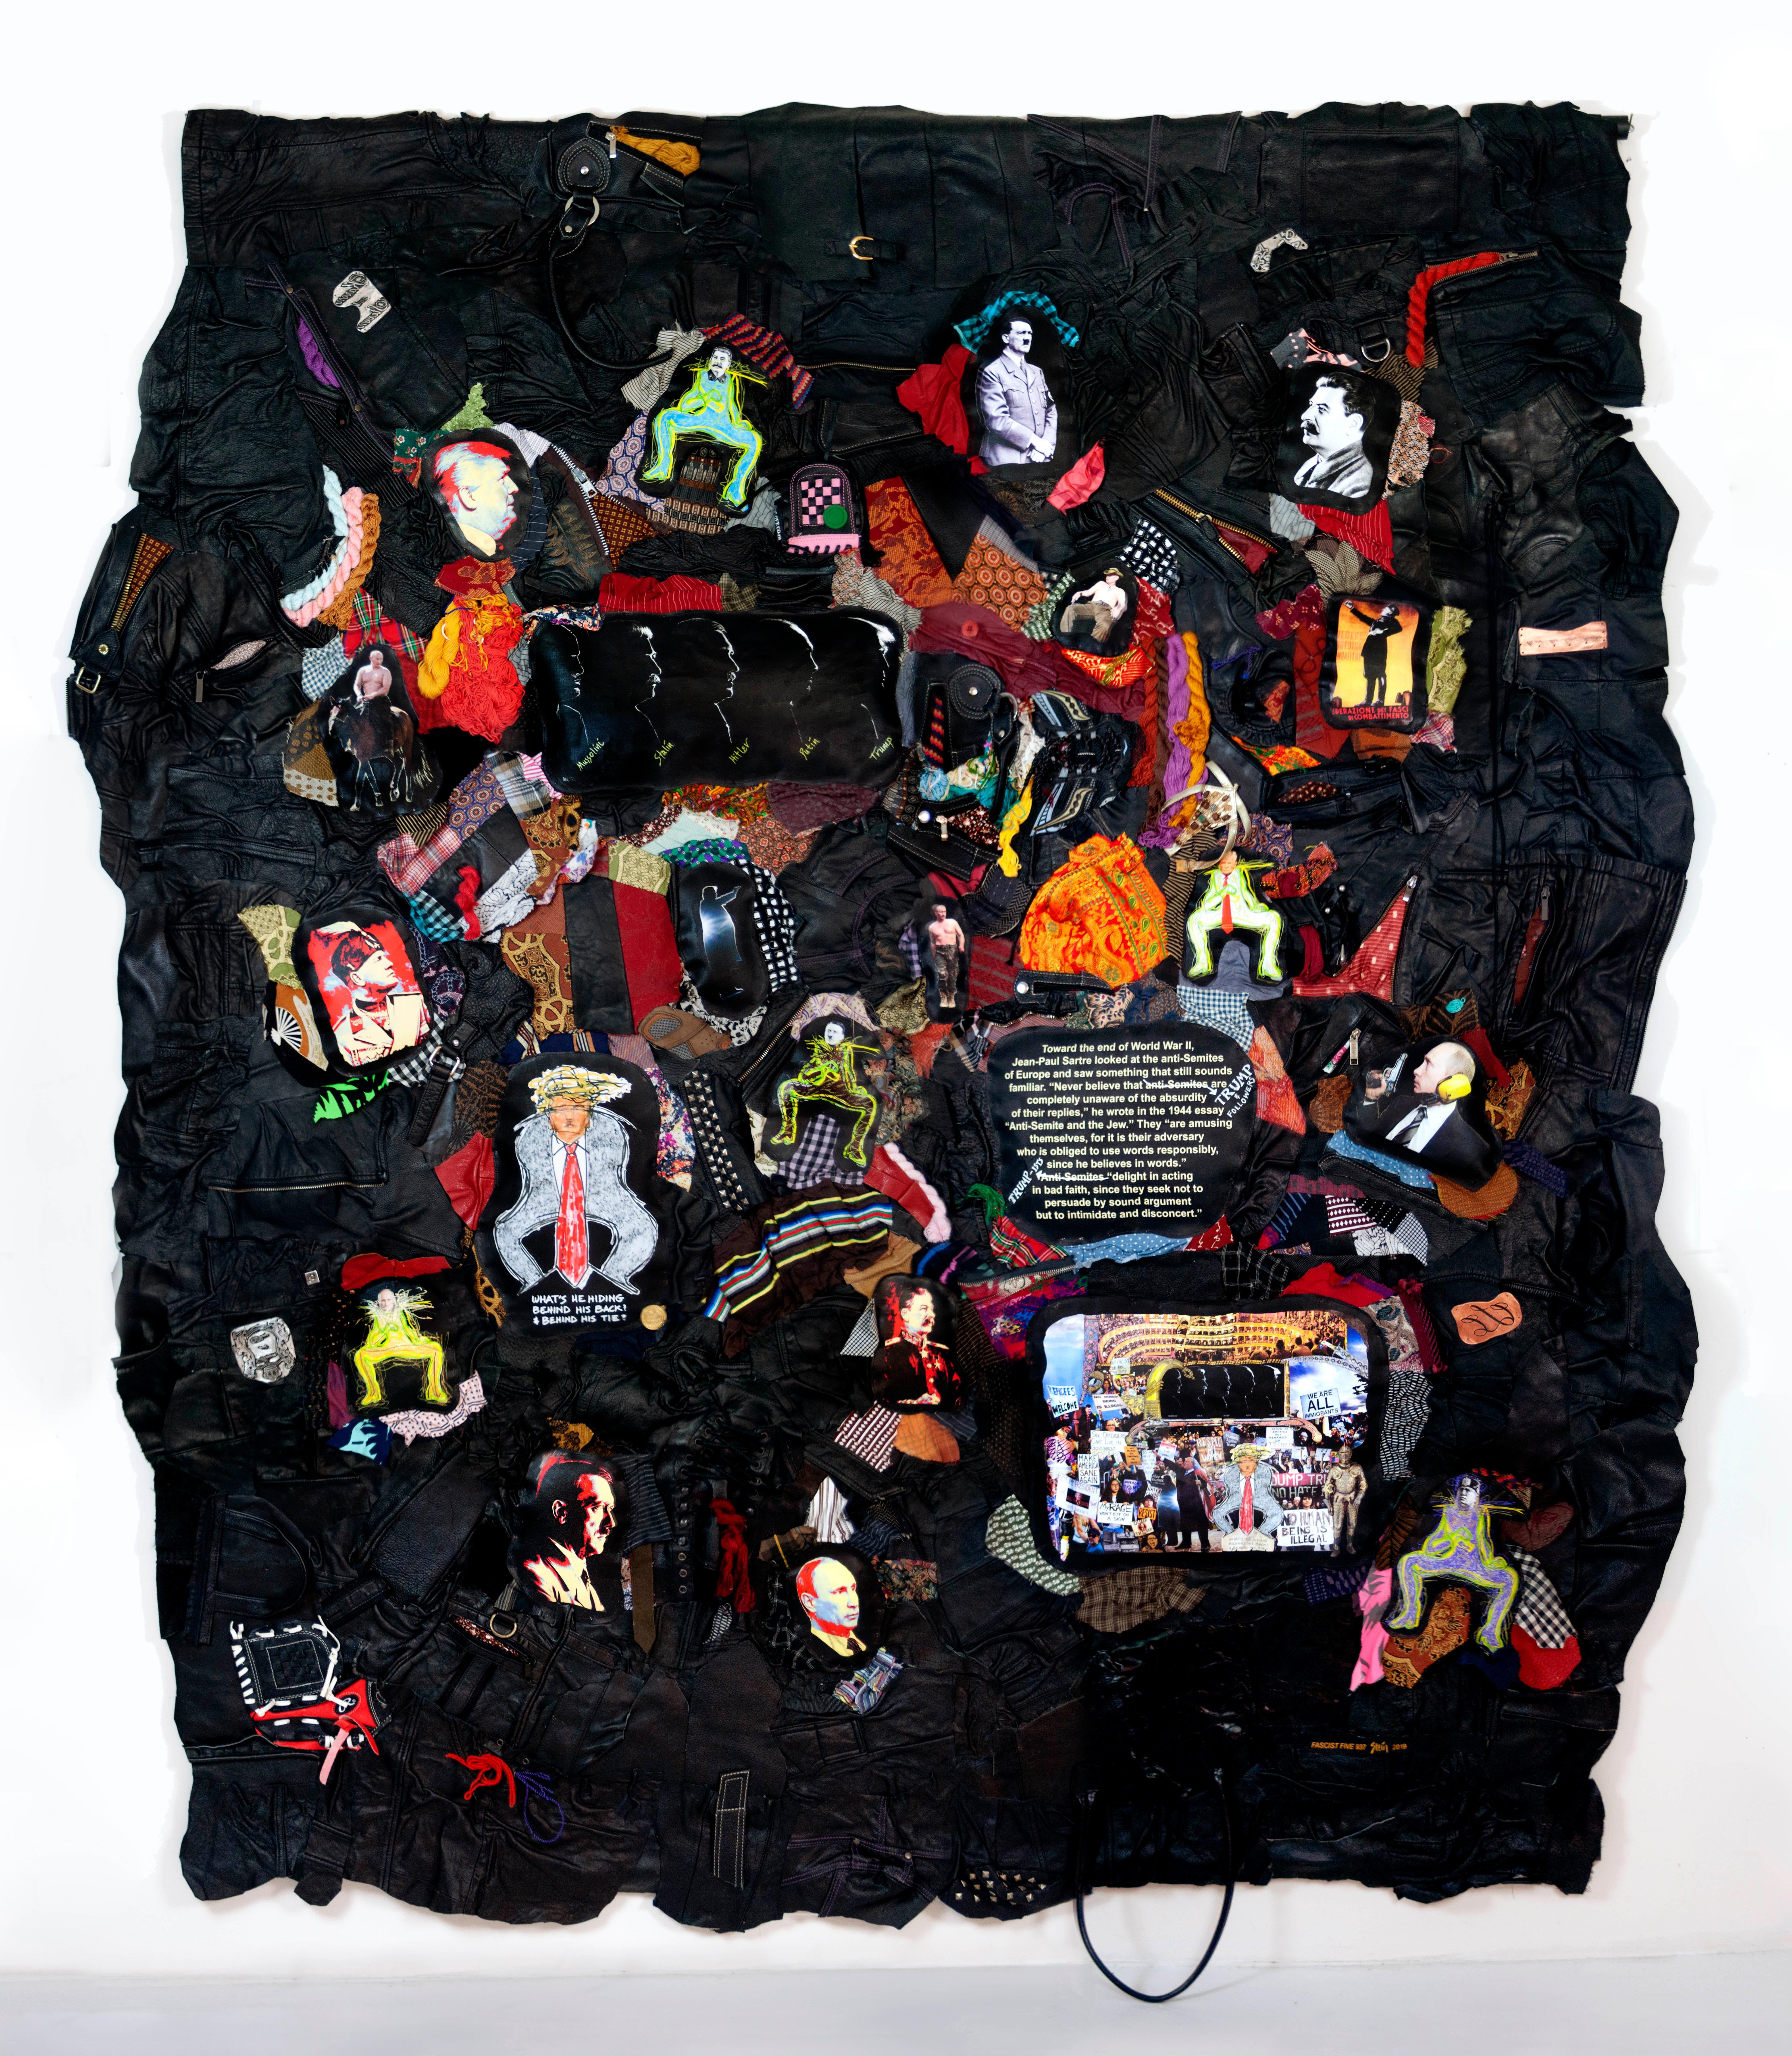 Feminist Contemporary Fabric Mixed Media Sculptural Tapestry - Fascist Five 937 - Mixed Media Art by Linda Stein